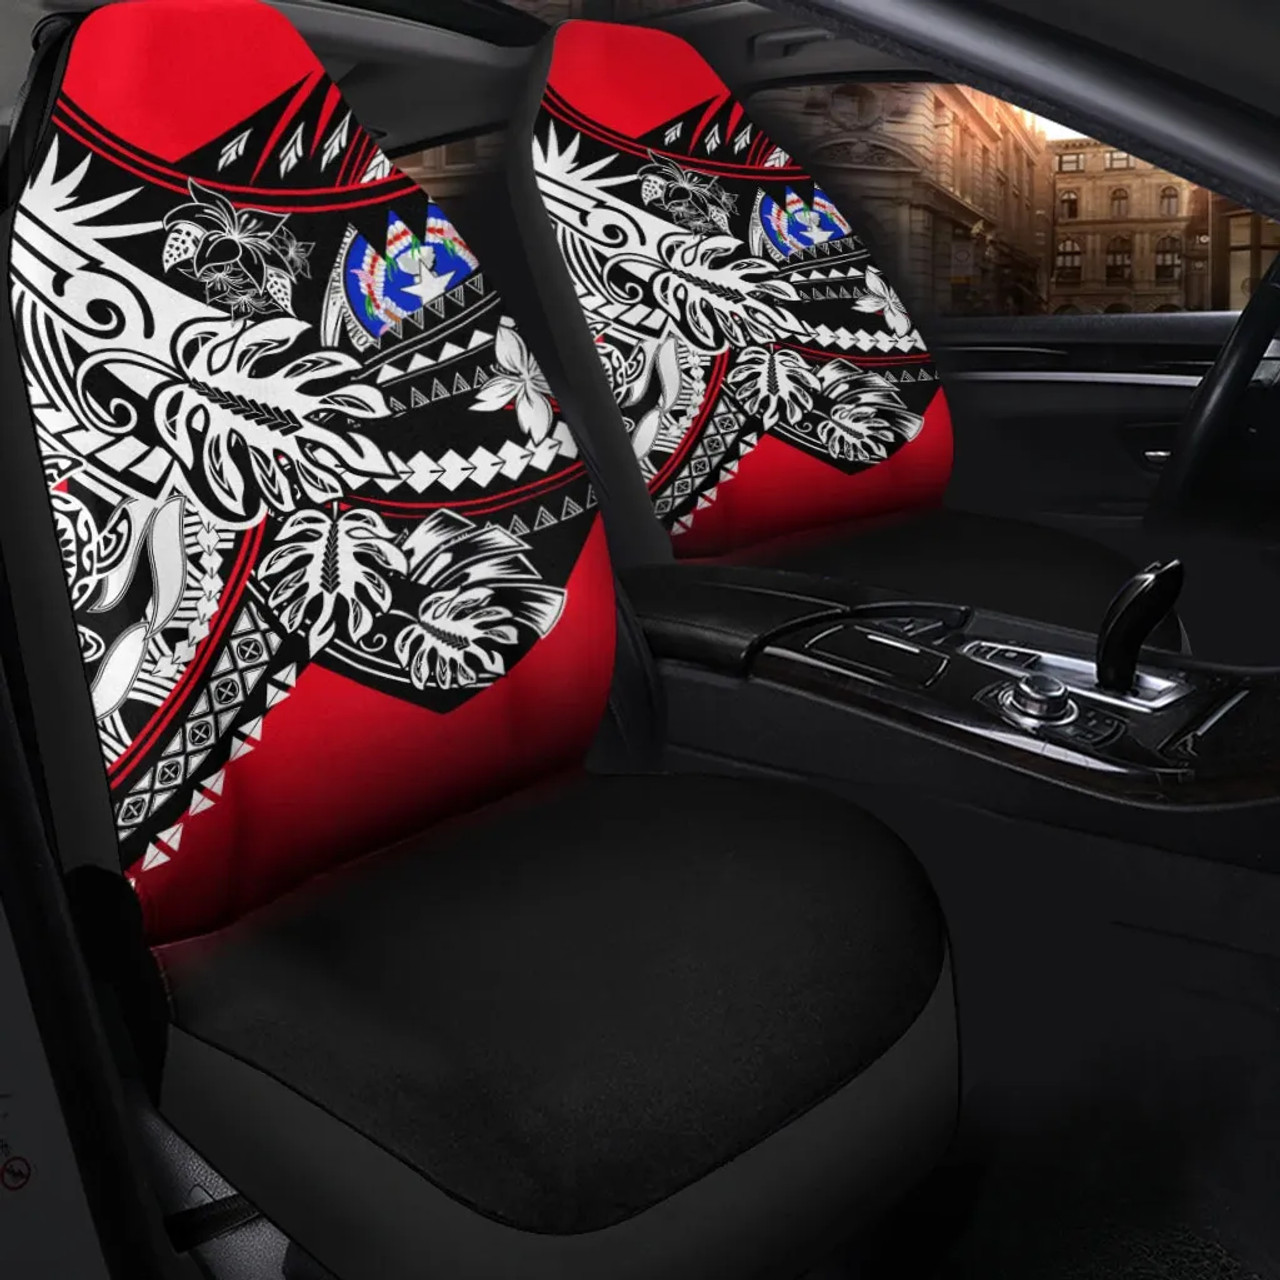 Northern Mariana Islands Car Seat Cover - Tribal Jungle Pattern